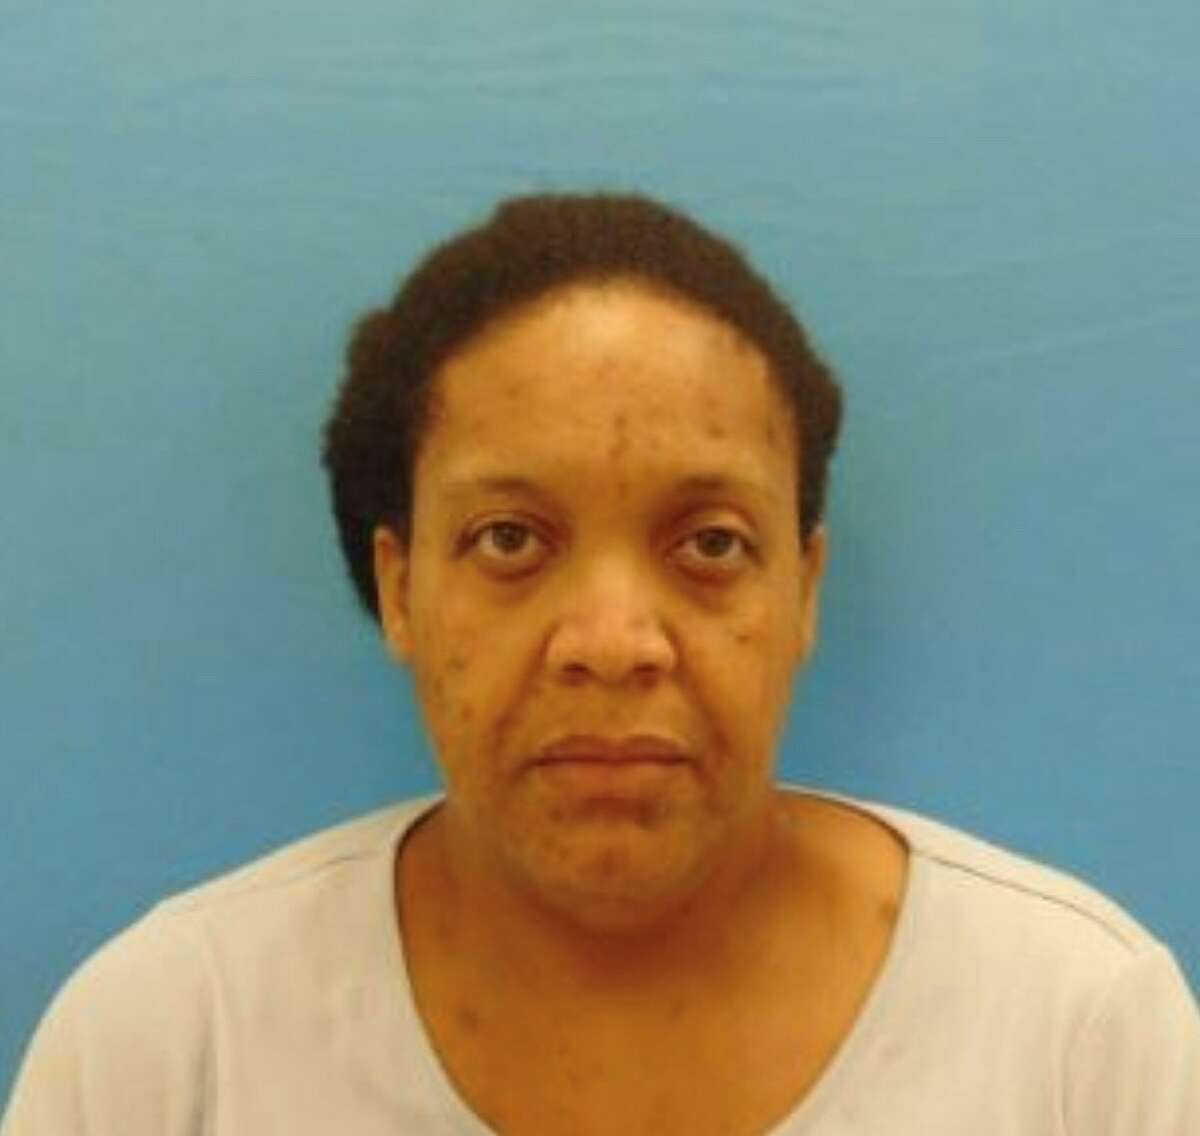 Former Seguin dispatcher Delissa Navonne Crayton, 47, has been arrested for injury to a child under the age of 15 on Wednesday in Seguin.